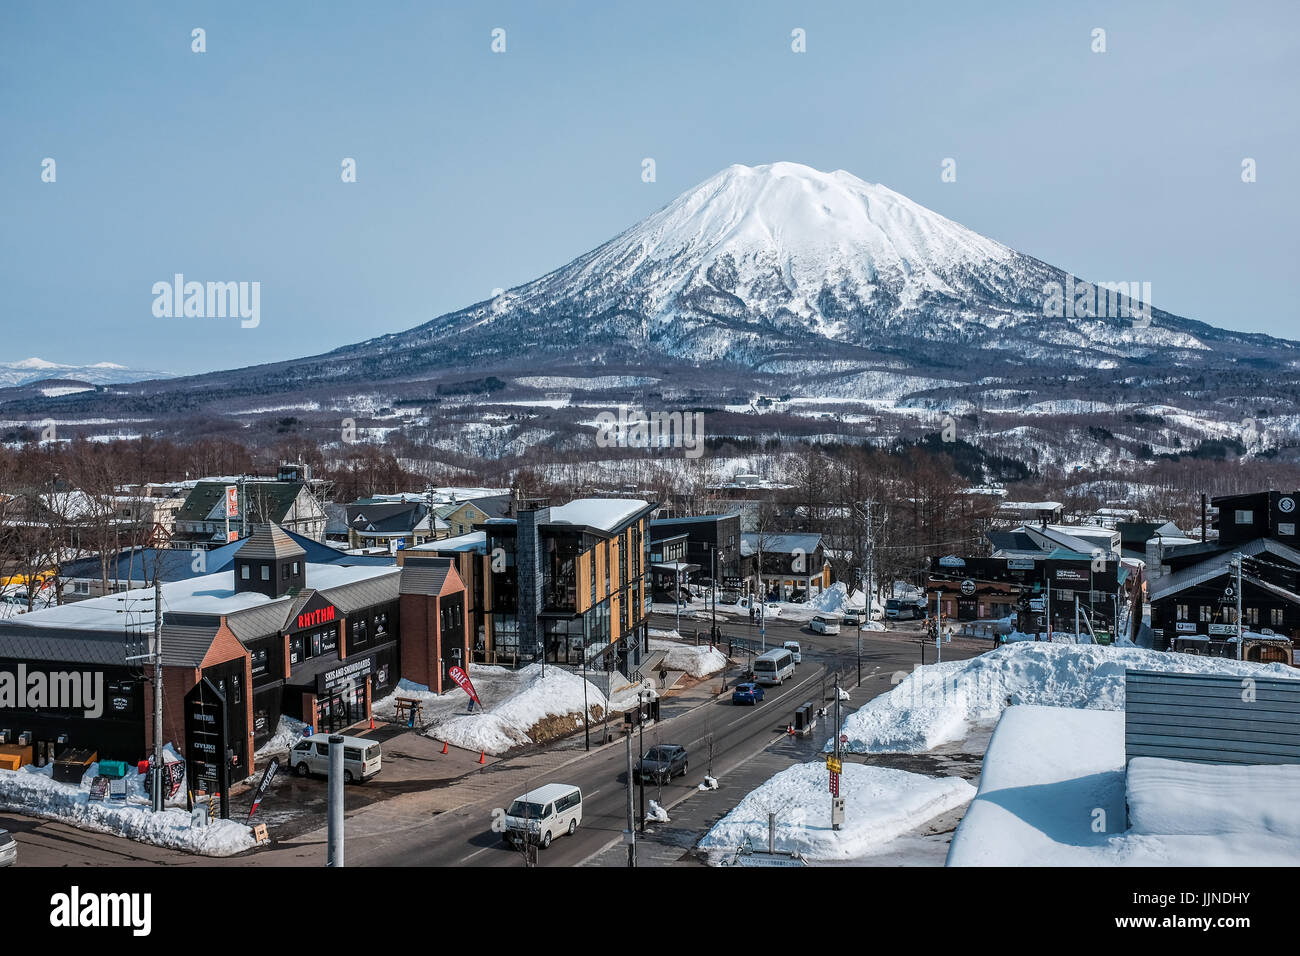 The Snow Capped Mount Yotei A Dormant Volcano In Niseko Japan As Viewed In The Evening Light From The Village Of Grand Hirafu Stock Photo Alamy